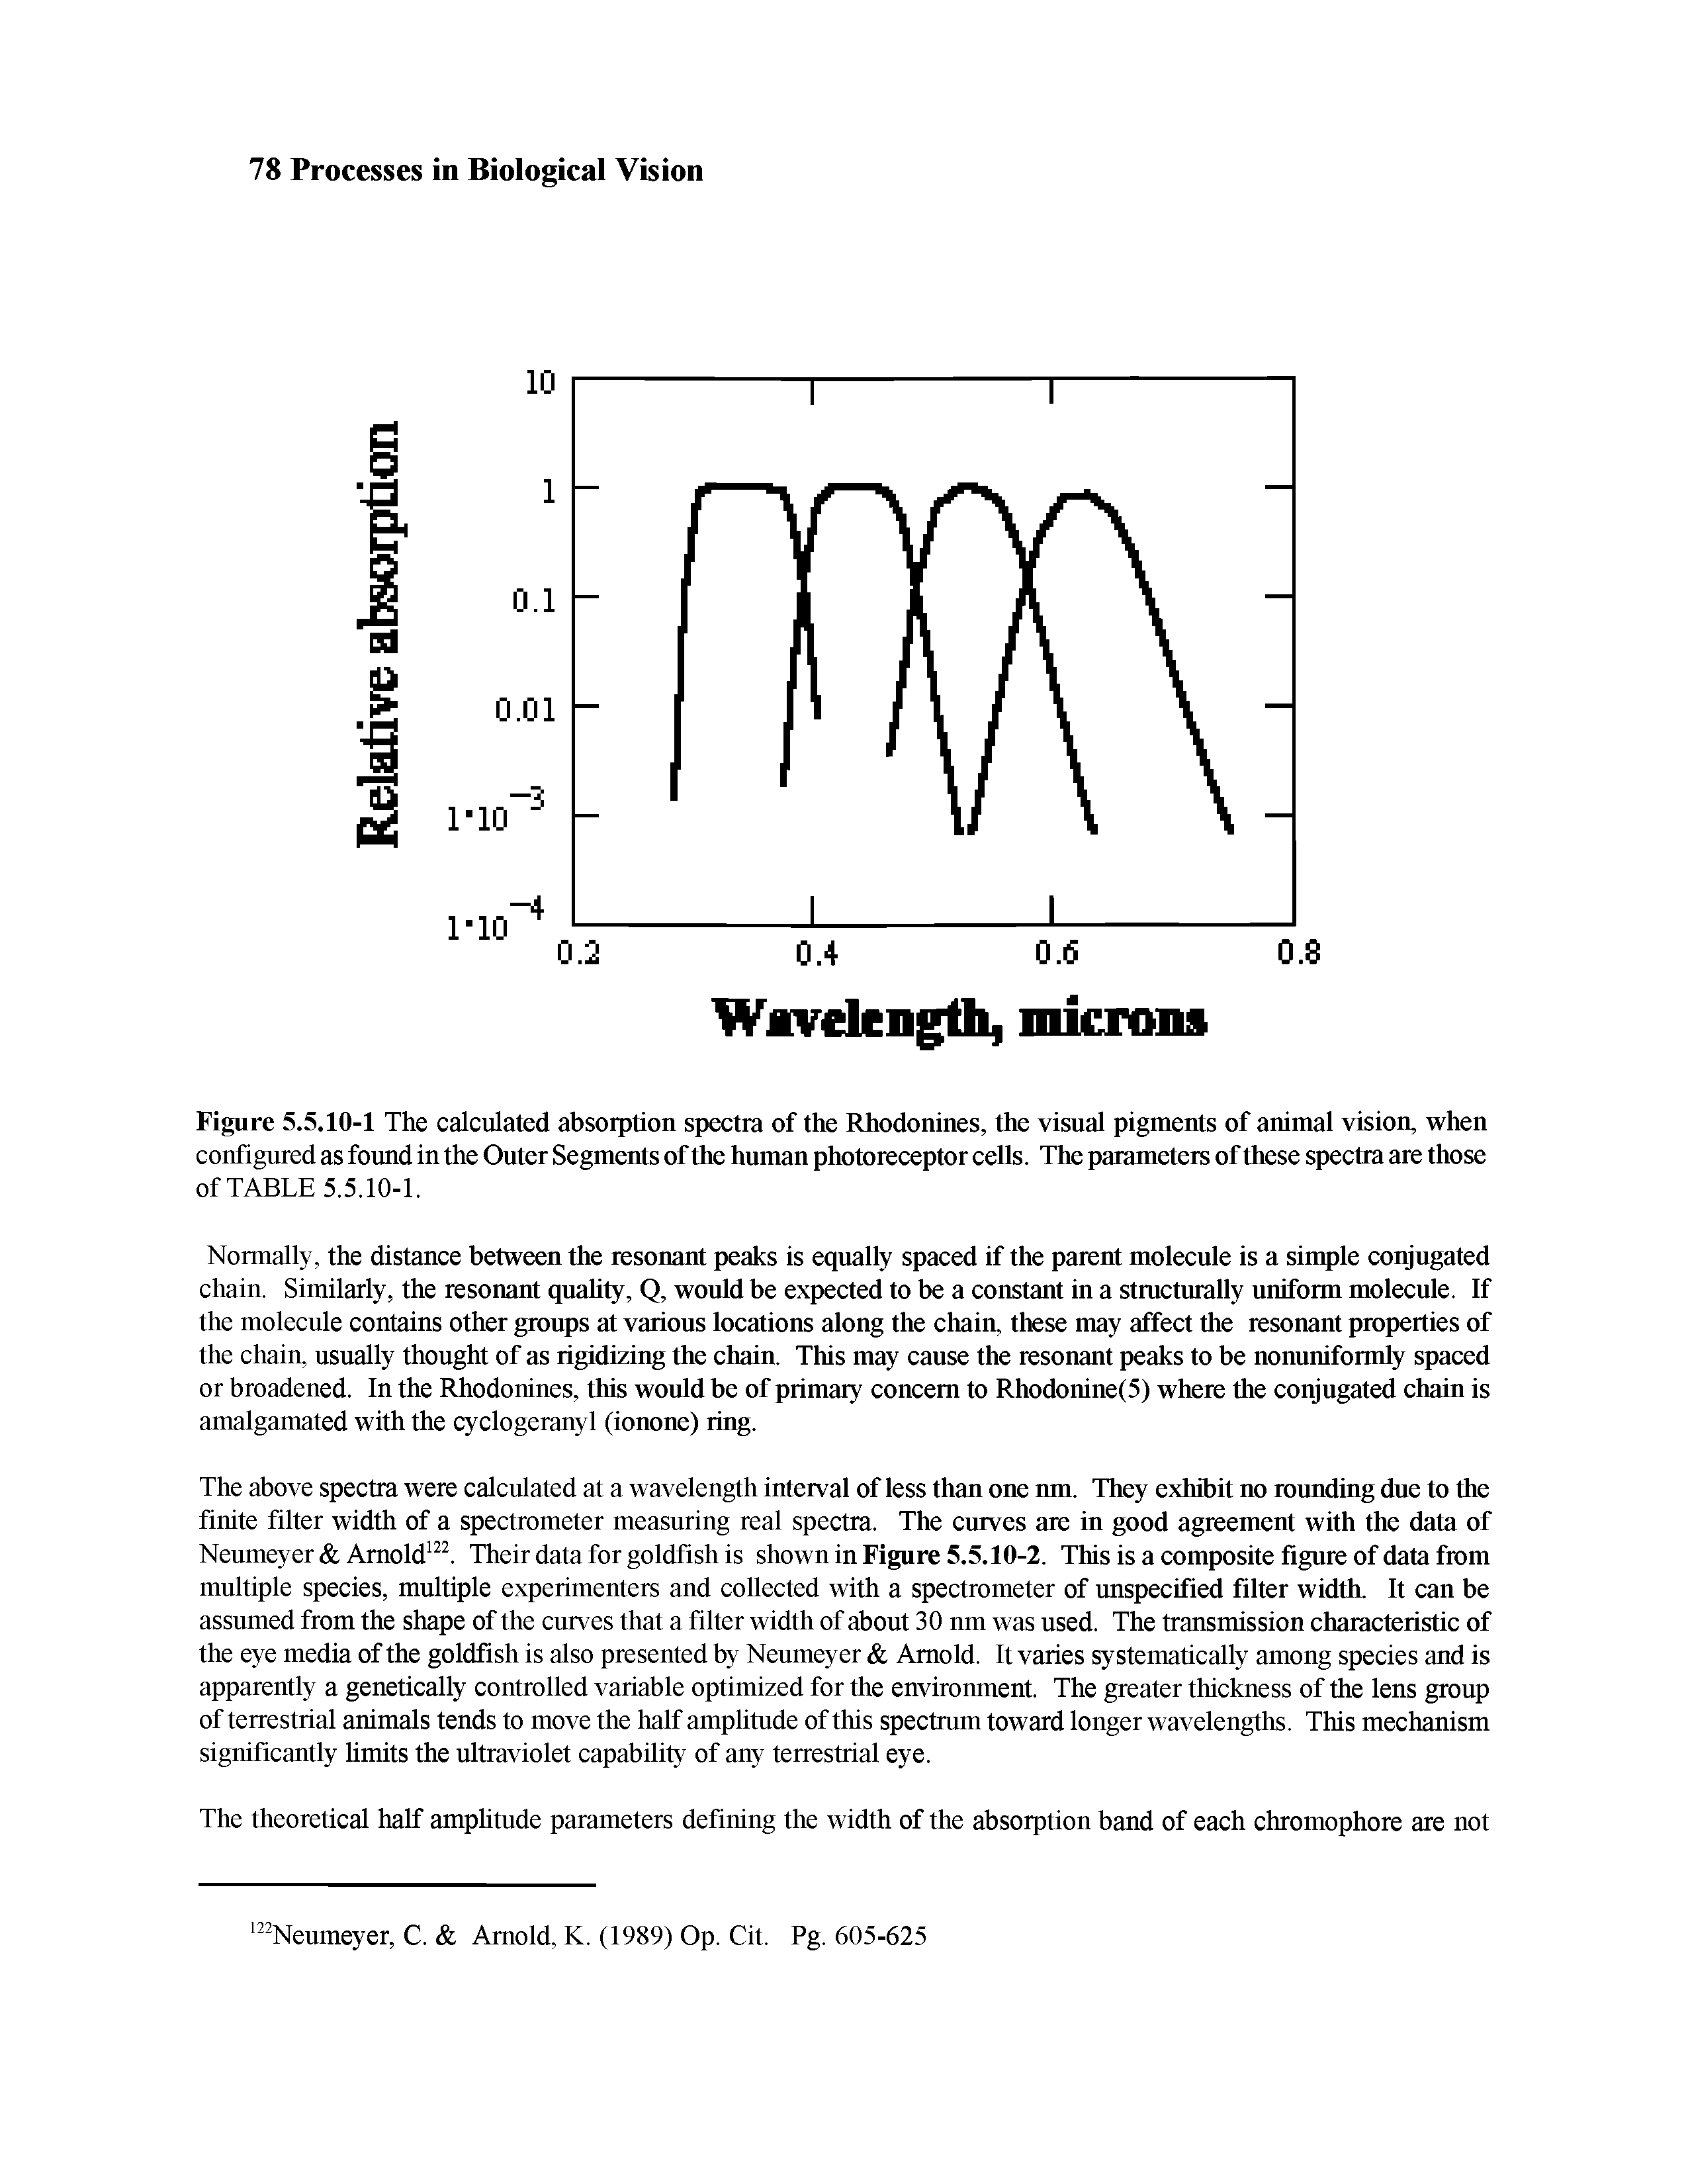 Figure 5.5.10-1 The calculated absorption spectra of the Rhodonines, the visual pigments of animal vision, when configured as found in the Outer Segments of the human photoreceptor cells. The parameters of these spectra are those of TABLE 5.5.10-1.